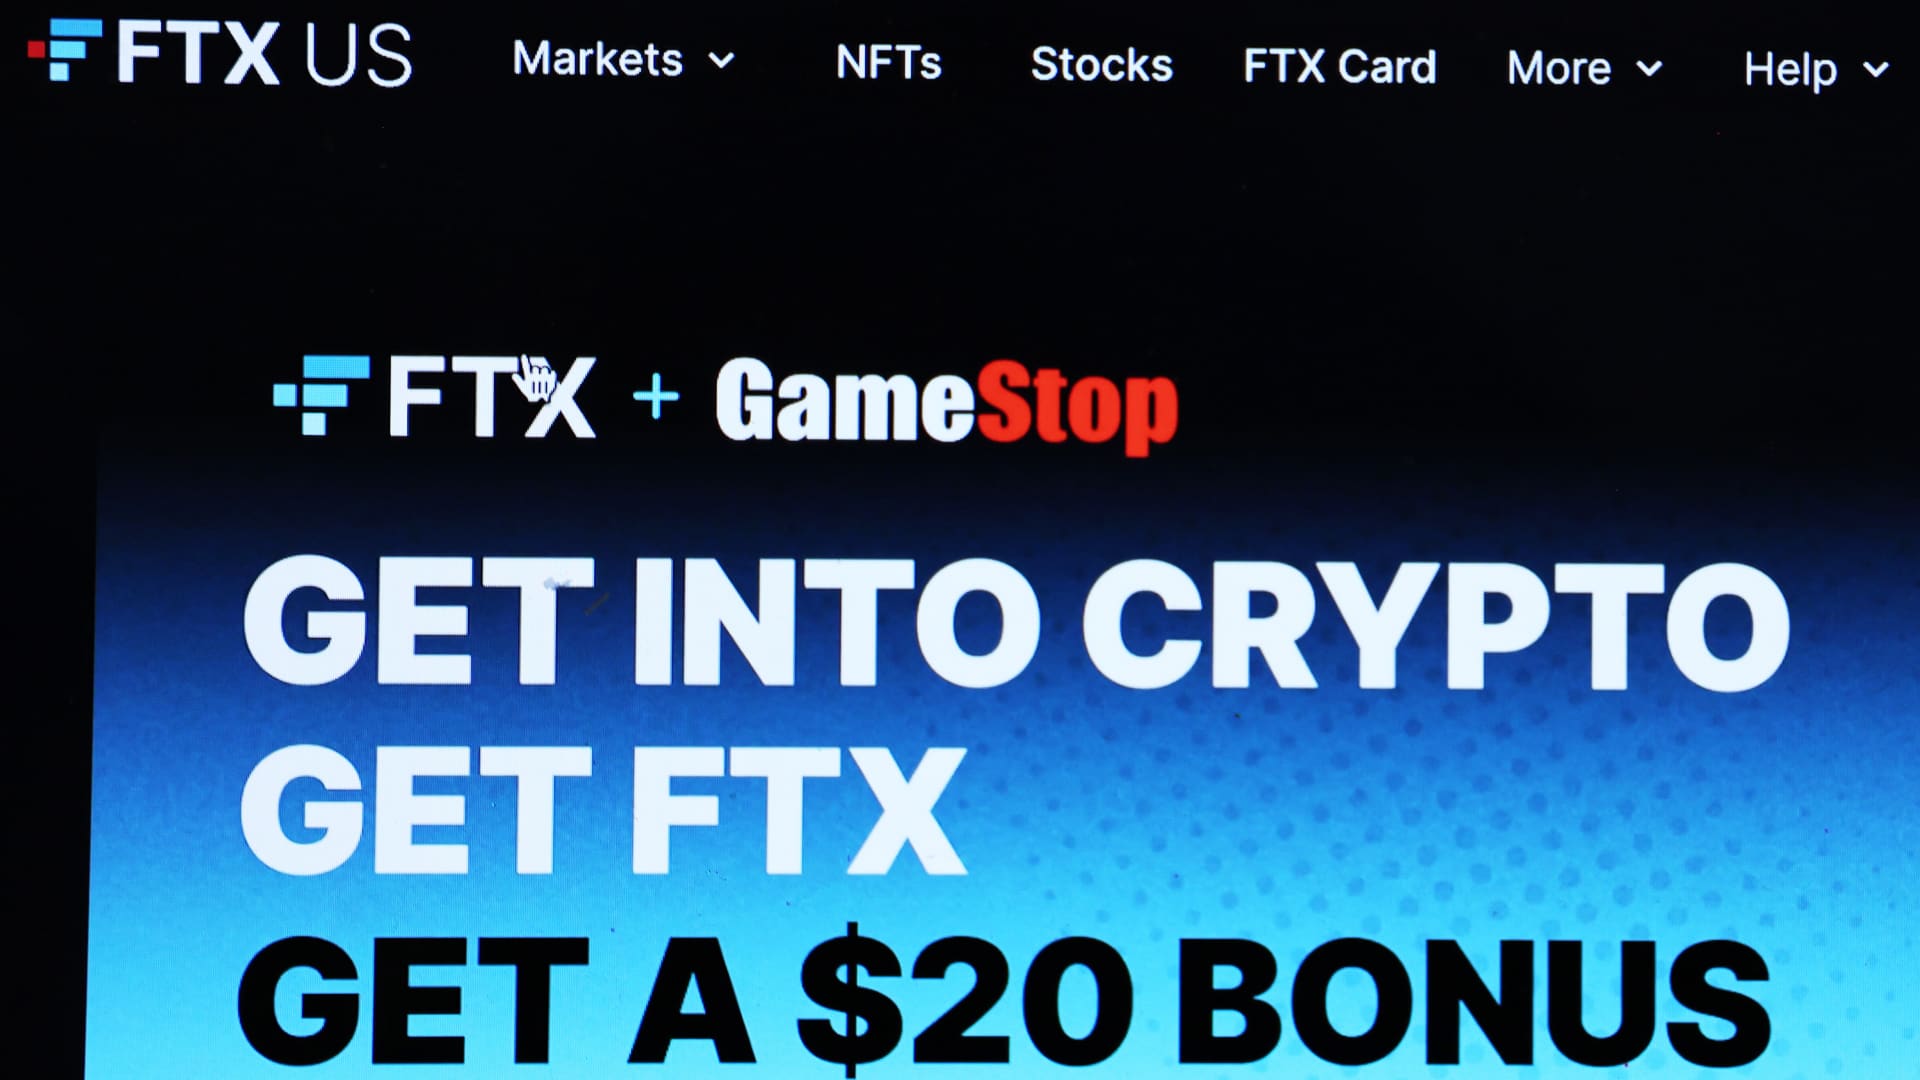 FTX says it’s removing trading and withdrawals, moving digital assets to a cold wallet after a 7 million suspected hack